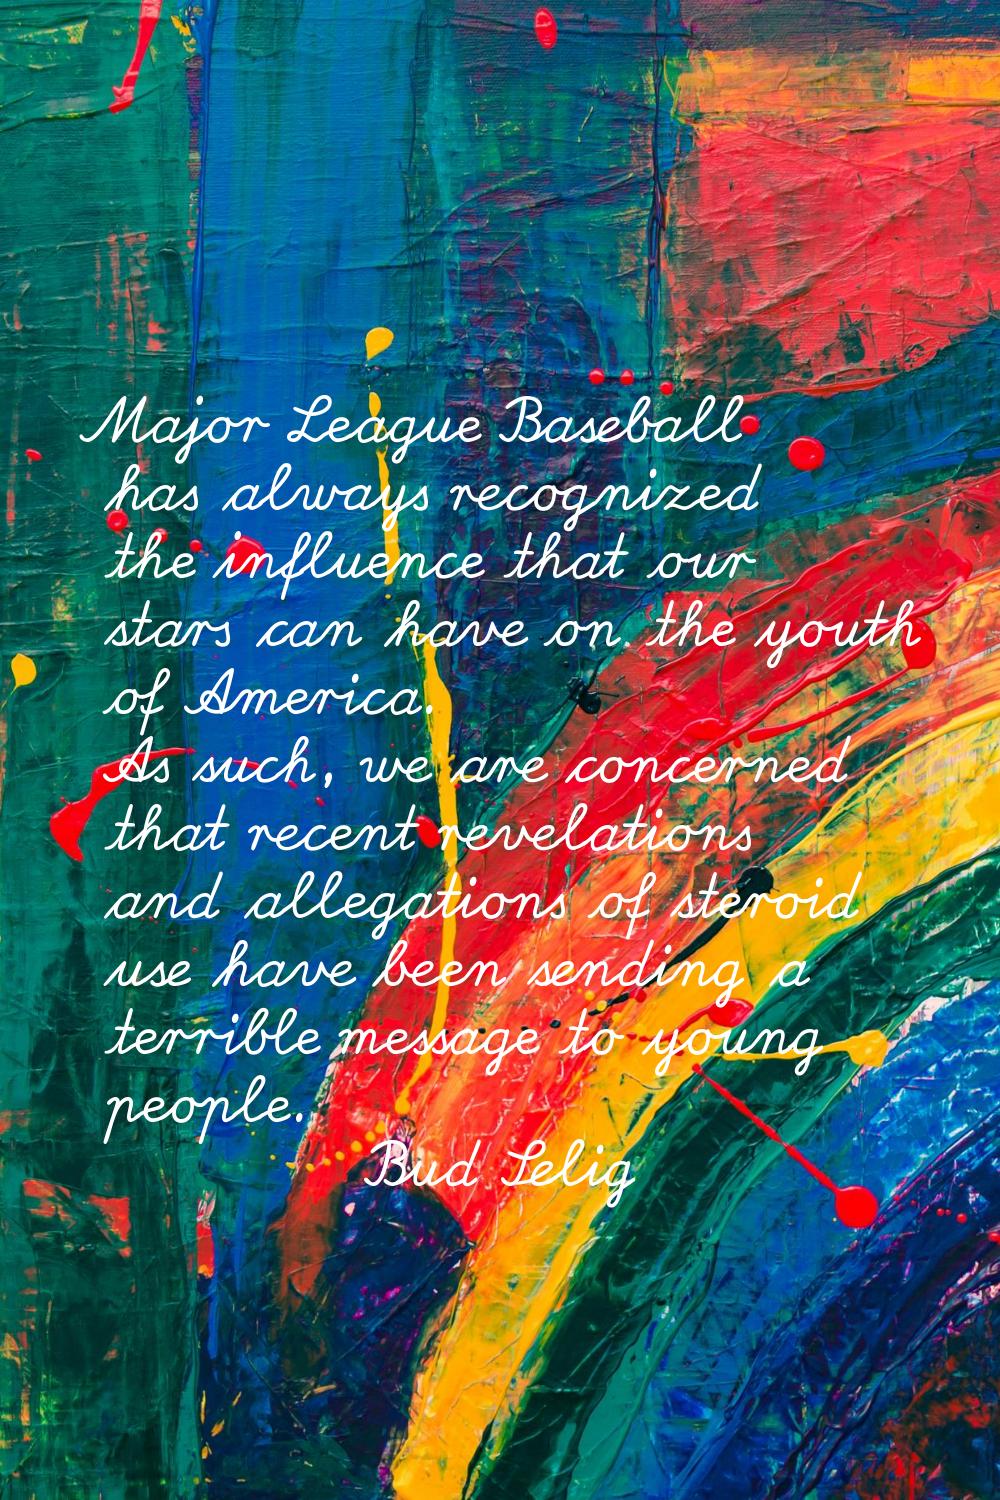 Major League Baseball has always recognized the influence that our stars can have on the youth of A